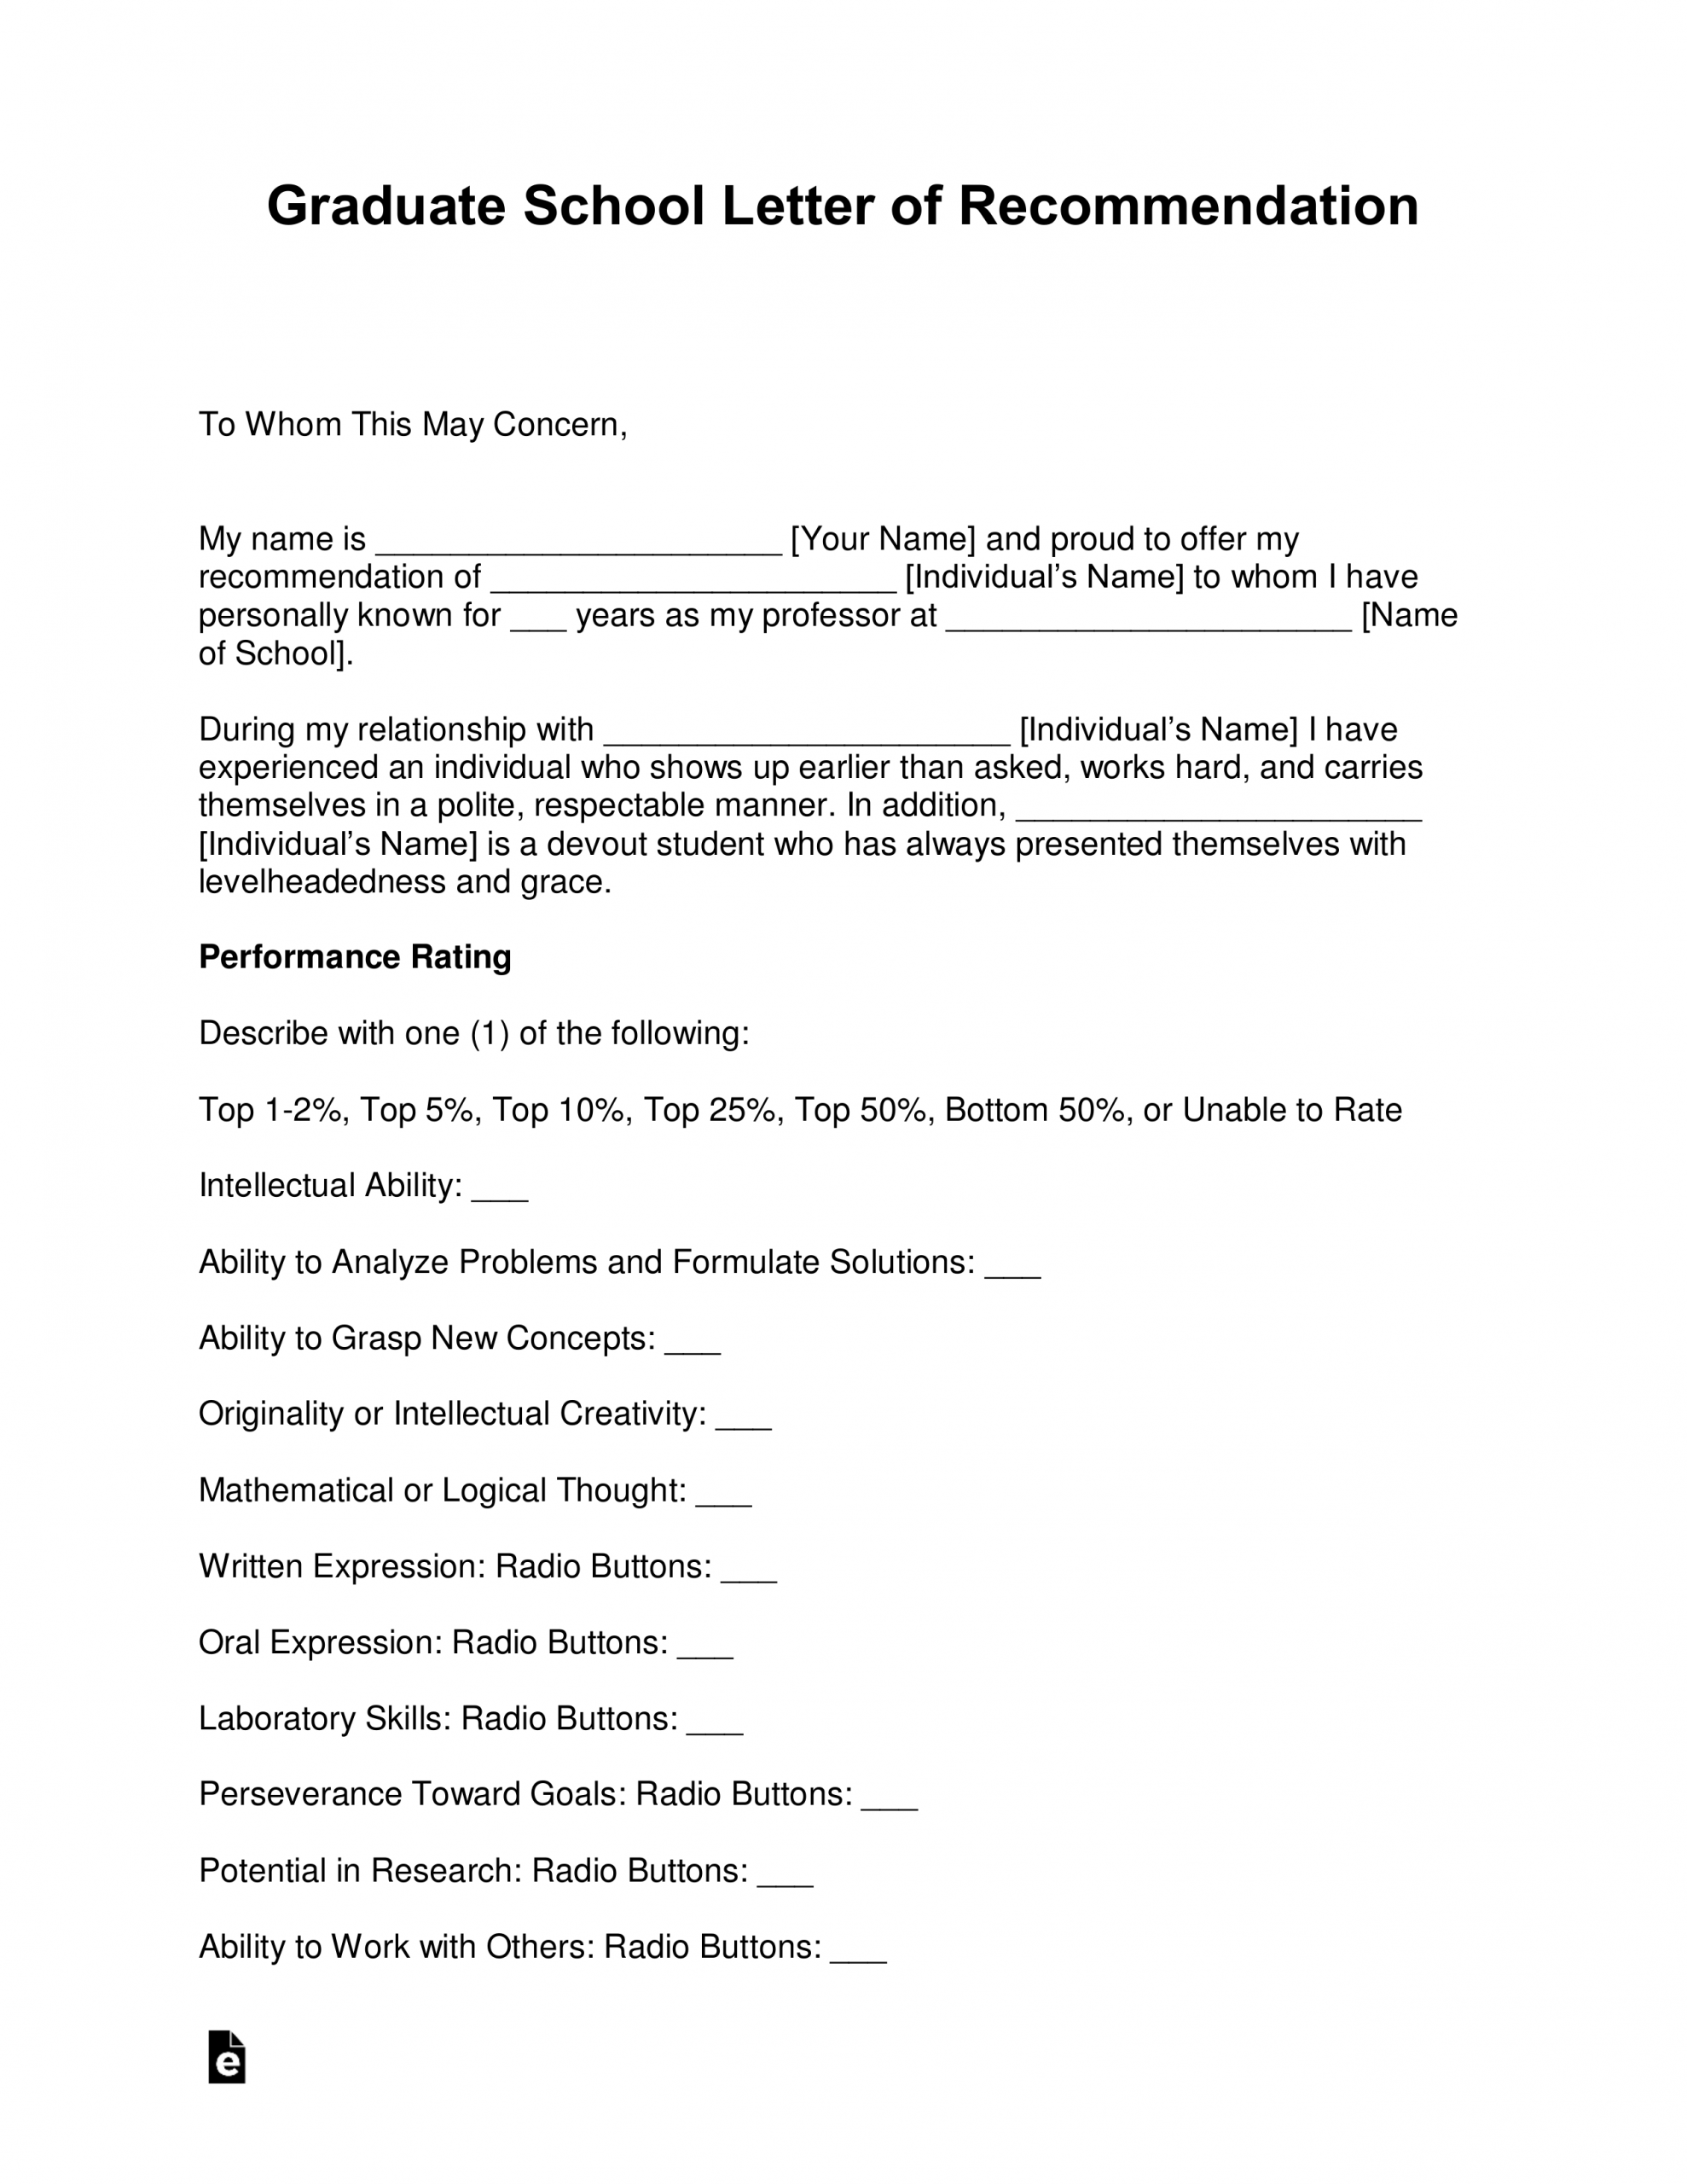 Free Graduate School Letter Of Recommendation Template throughout dimensions 2550 X 3301